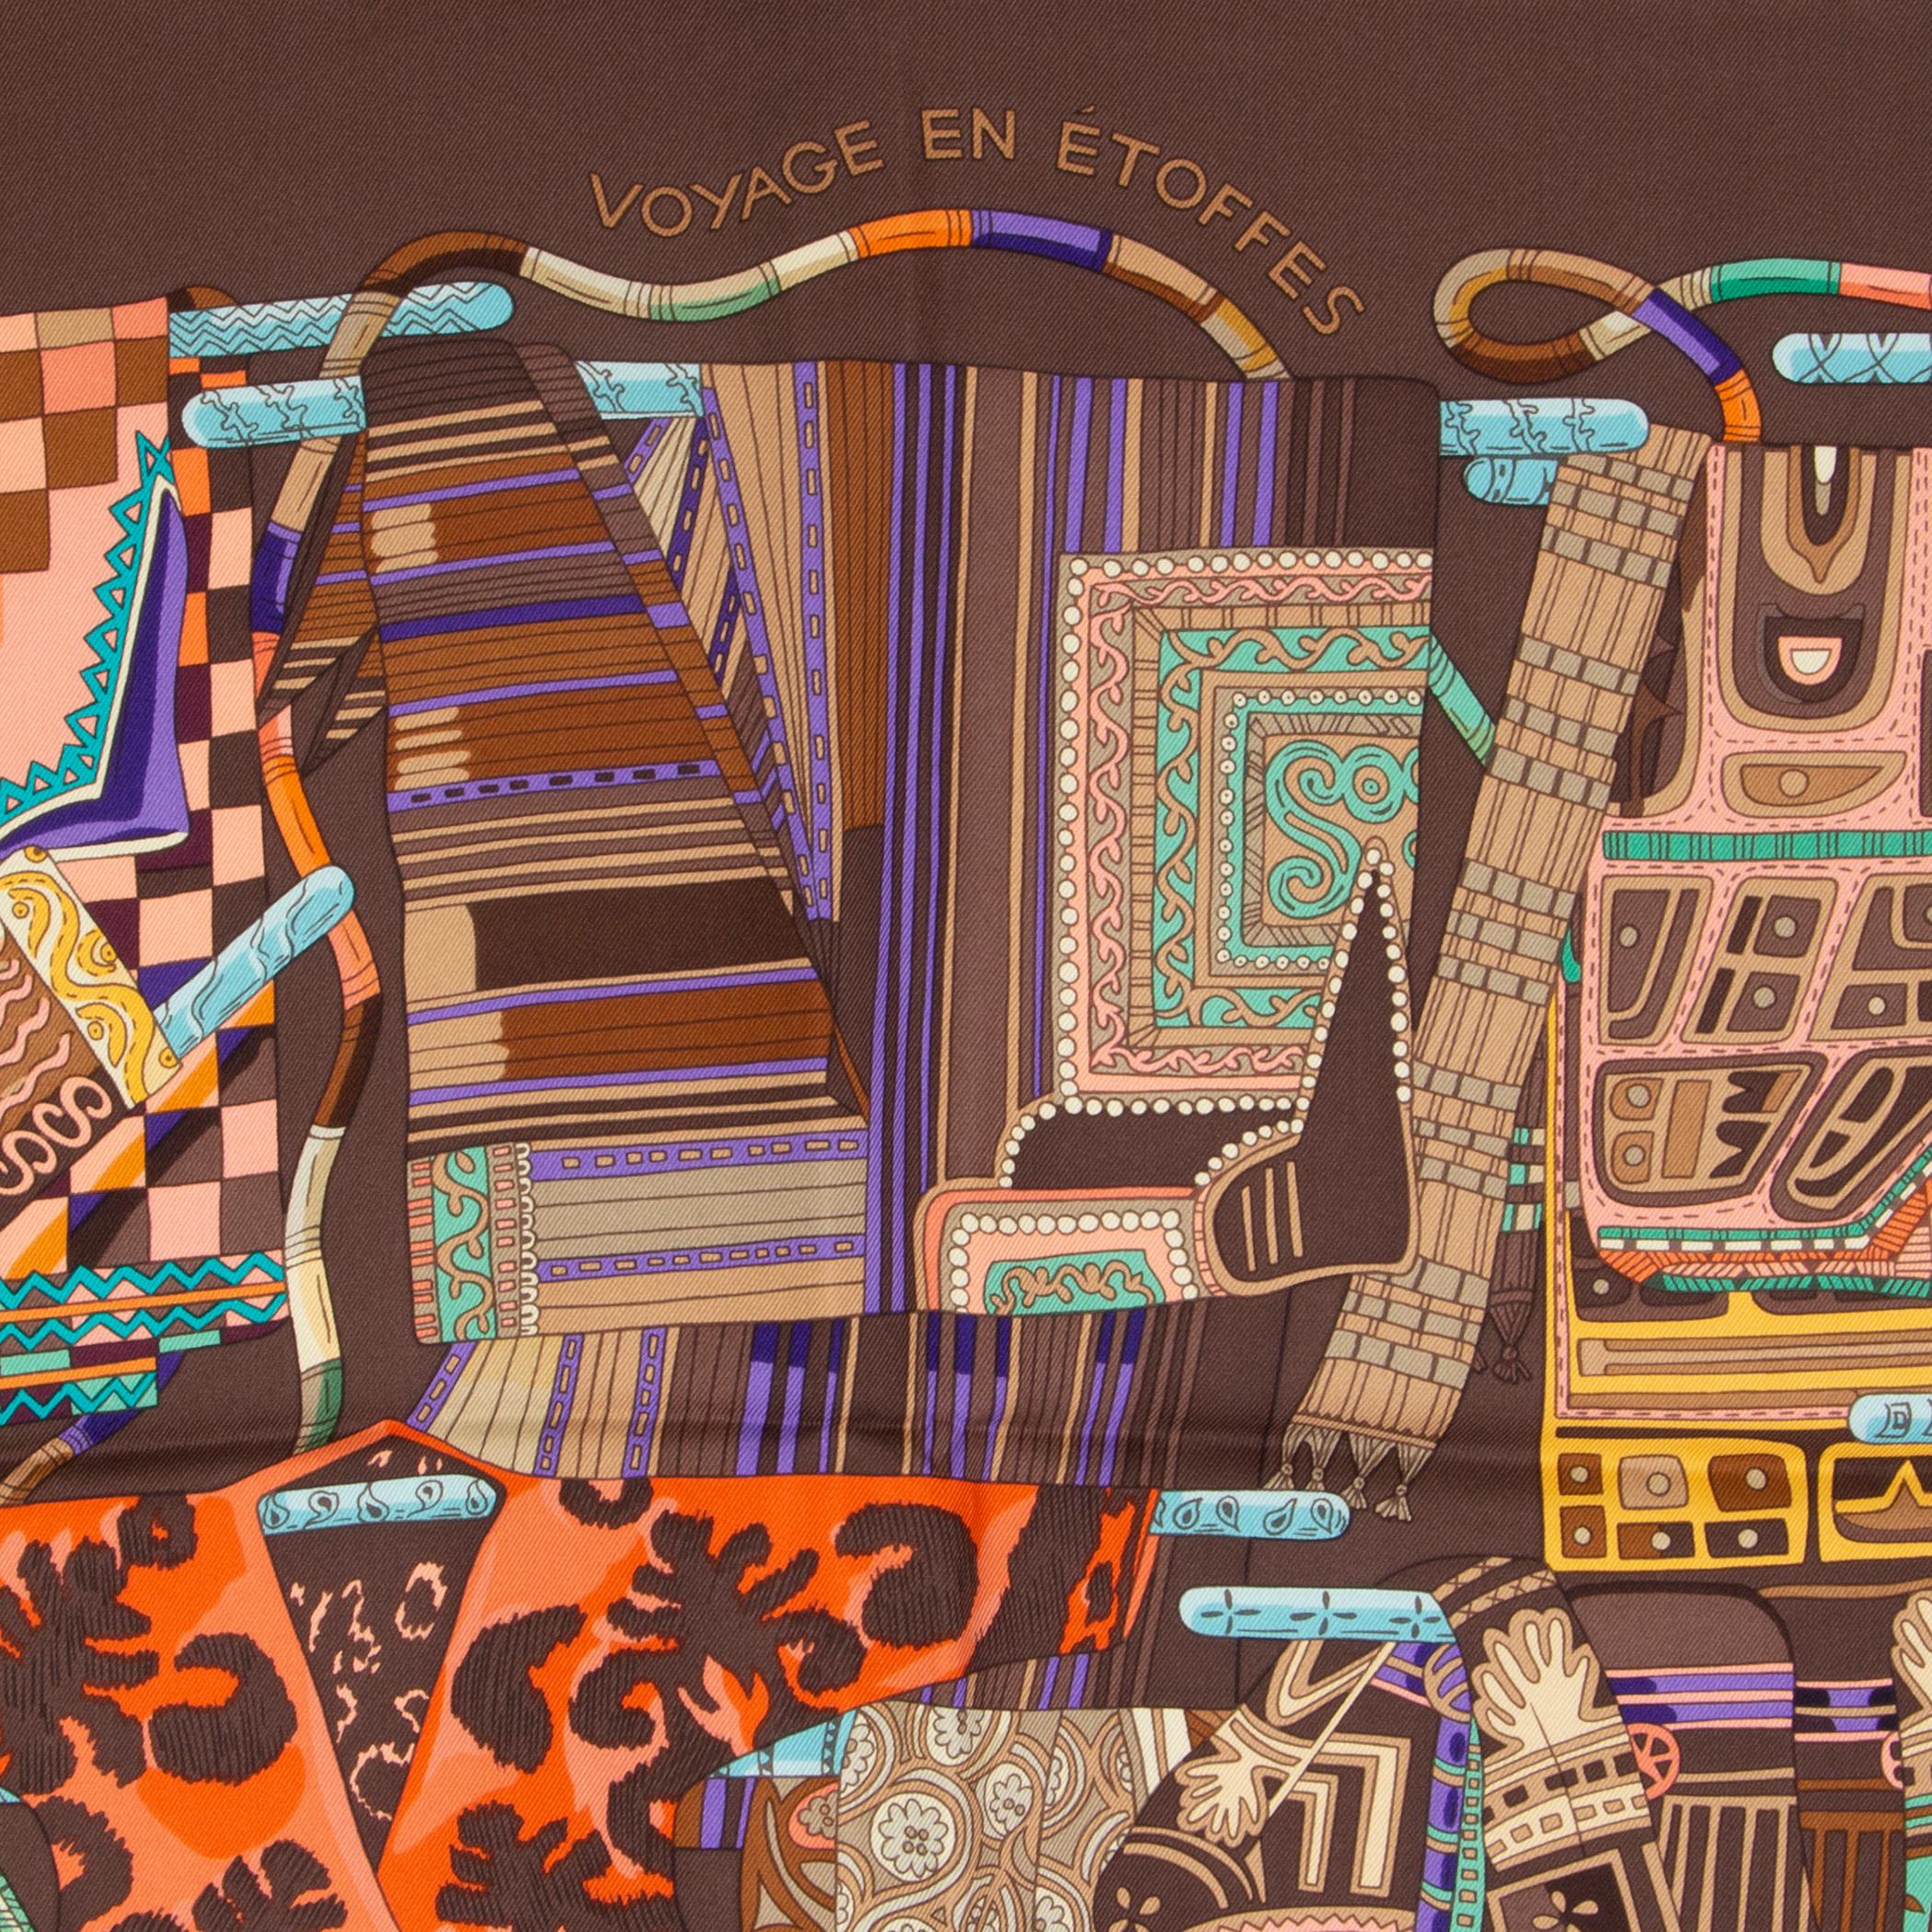 Hermès 'Voyage en Etoffes' scarf by Annie Faivre in chocolate, grape, chartreuse, yellow, and coral silk twill. Has been worn and is in excellent condition. 

Width 90cm (35.1in)
Height 90cm (35.1in)